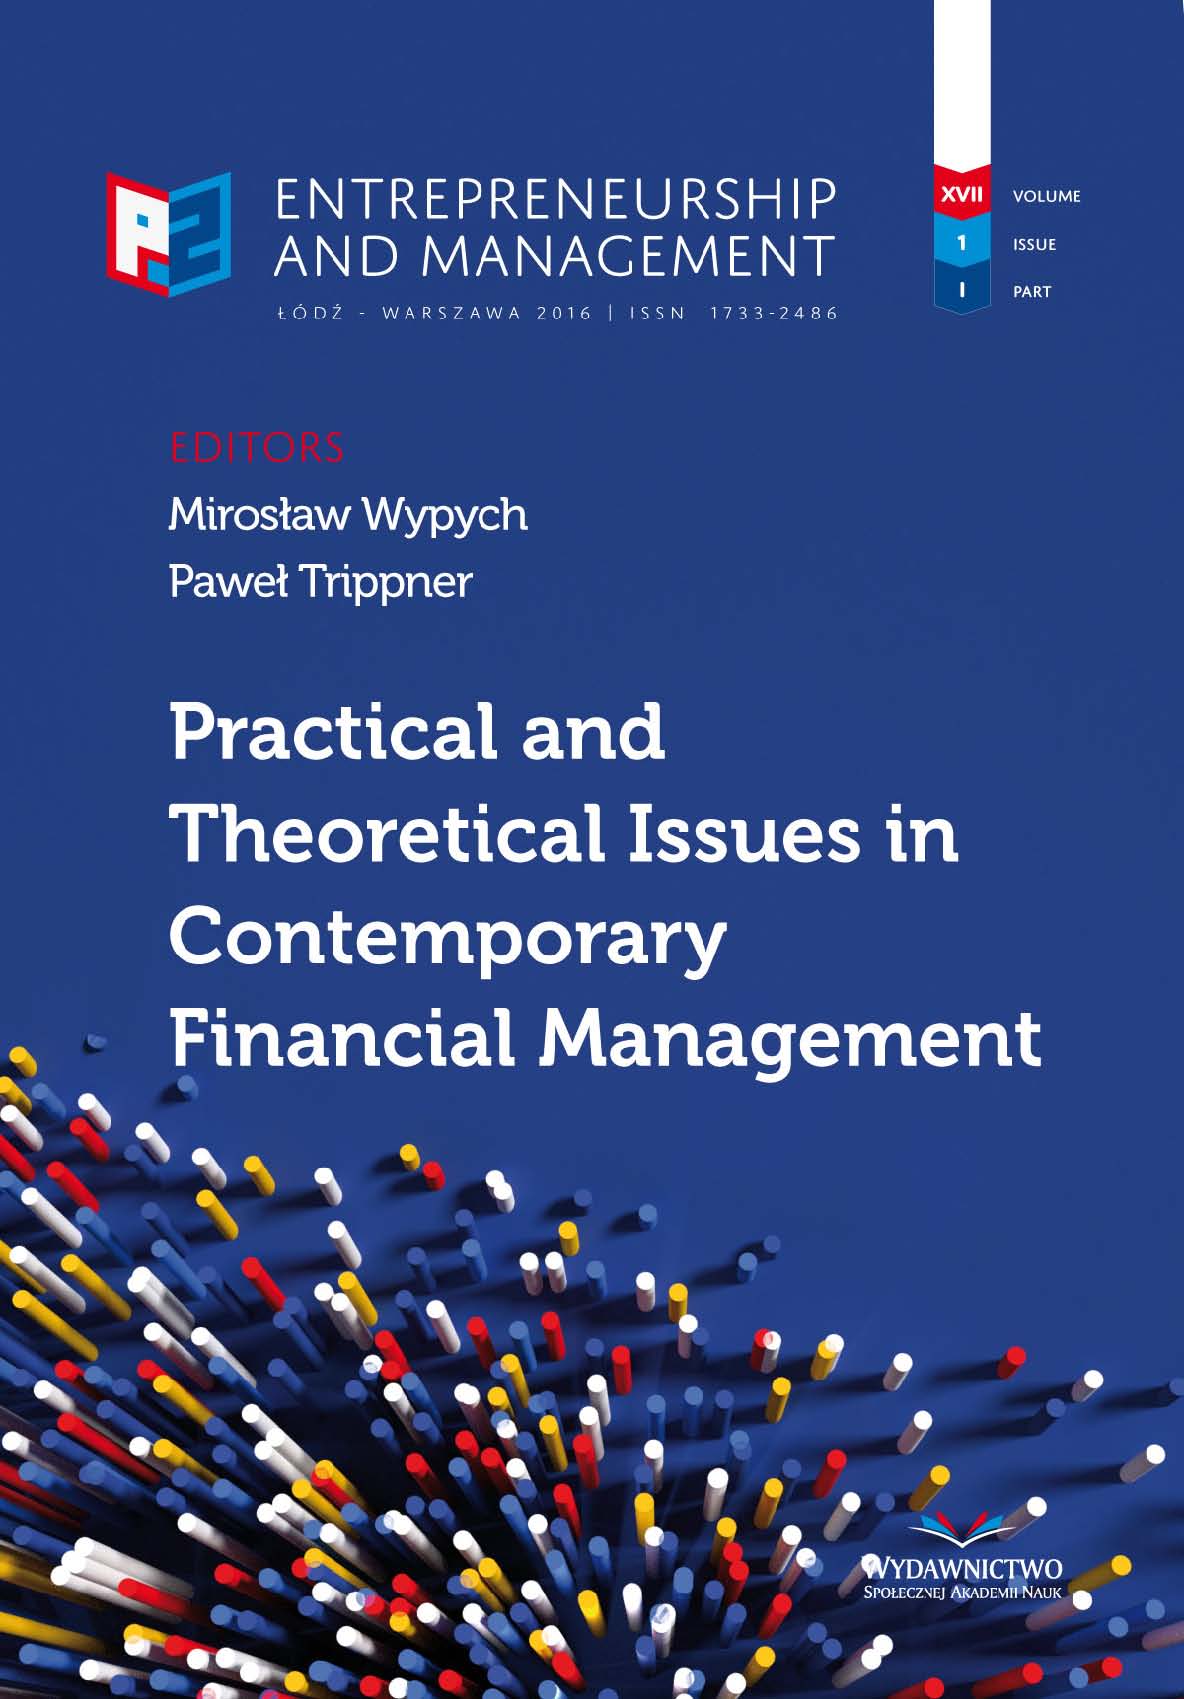 Medical Contracts as a Specific Source of Financing
Health Care in Poland Cover Image